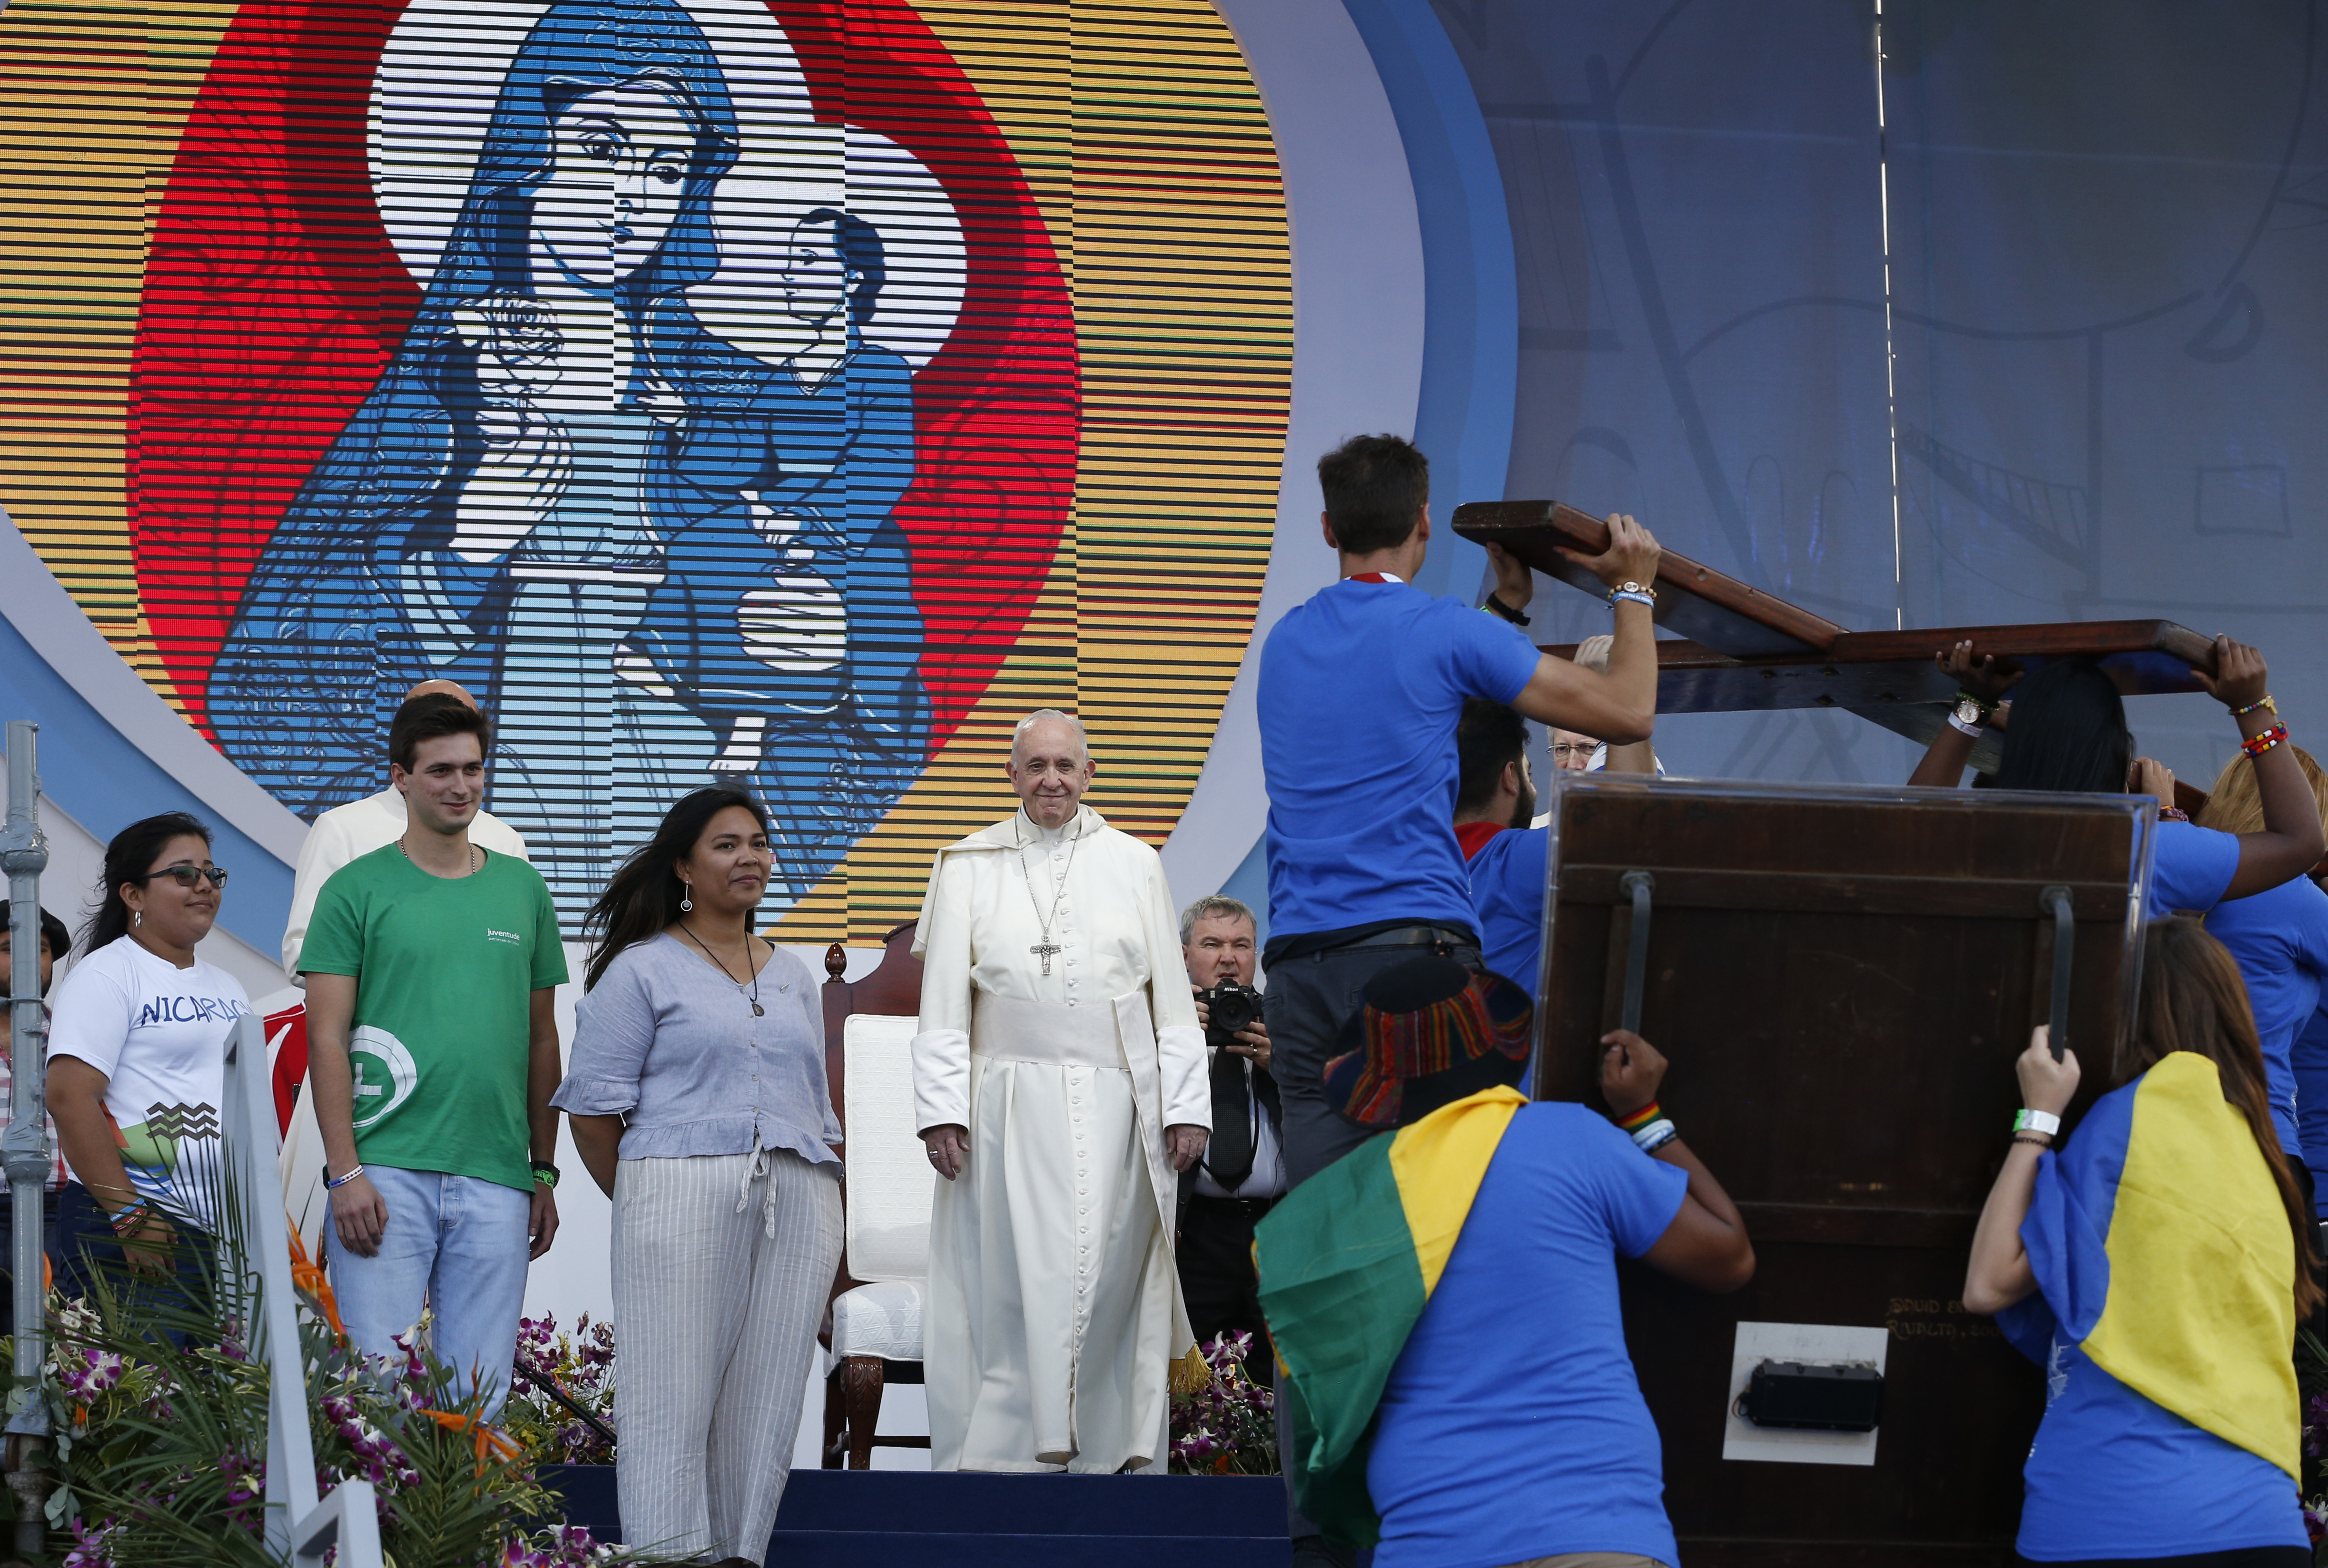 Pope quotes St Oscar Romero to inspire young Catholics in Panama